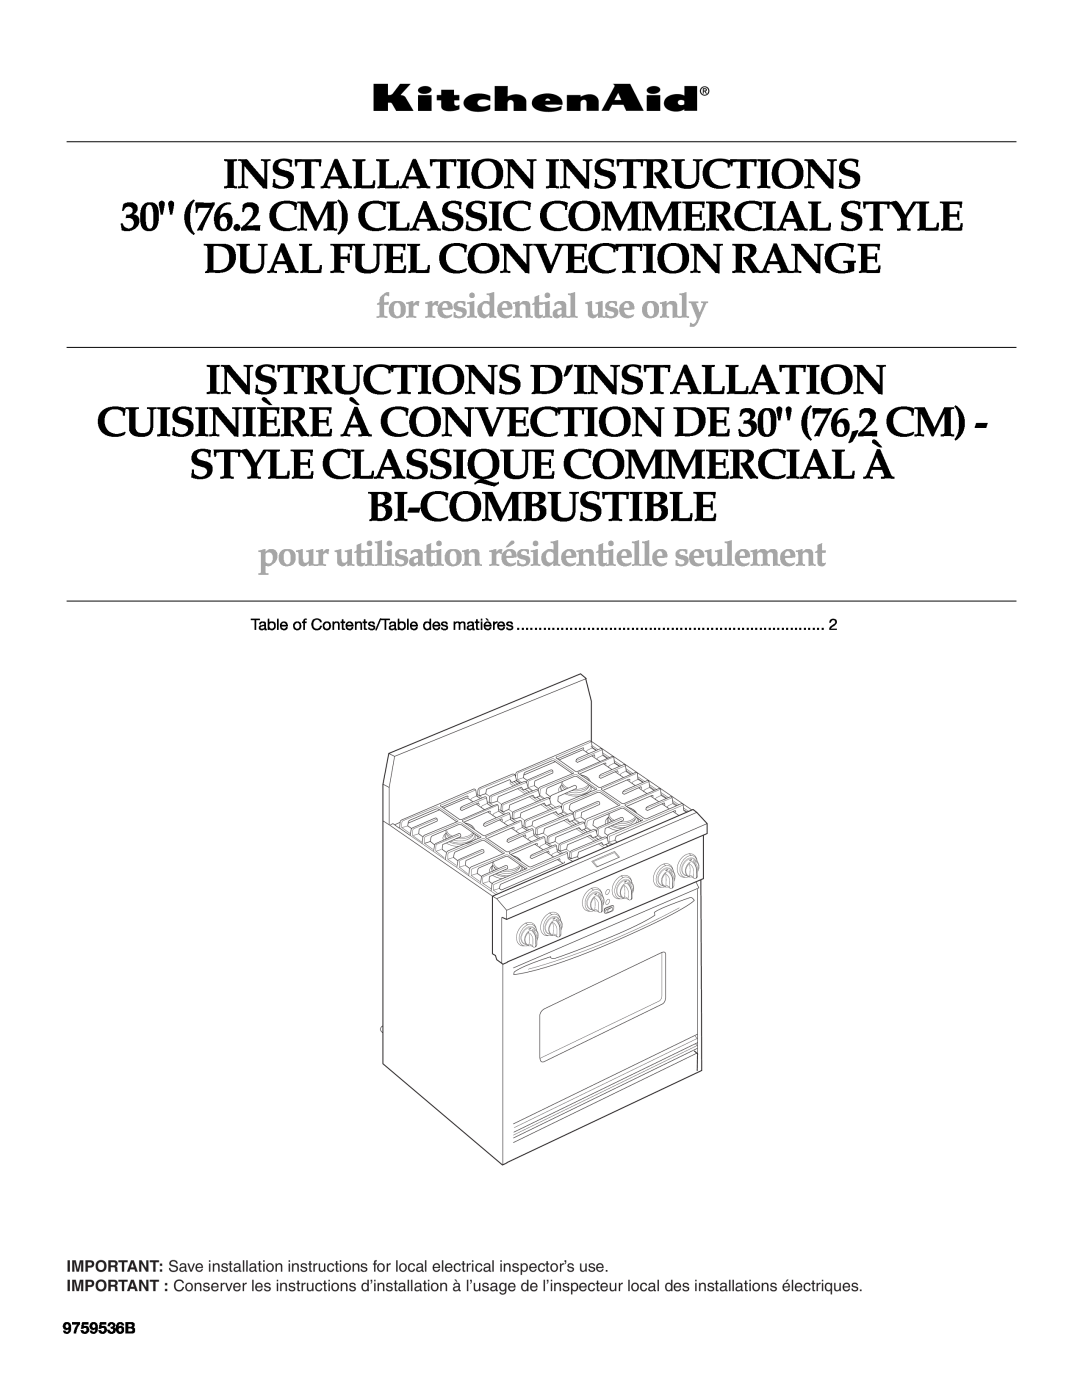 KitchenAid 9759536B installation instructions INSTALLATION INSTRUCTIONS 30 76.2 CM CLASSIC COMMERCIAL STYLE 